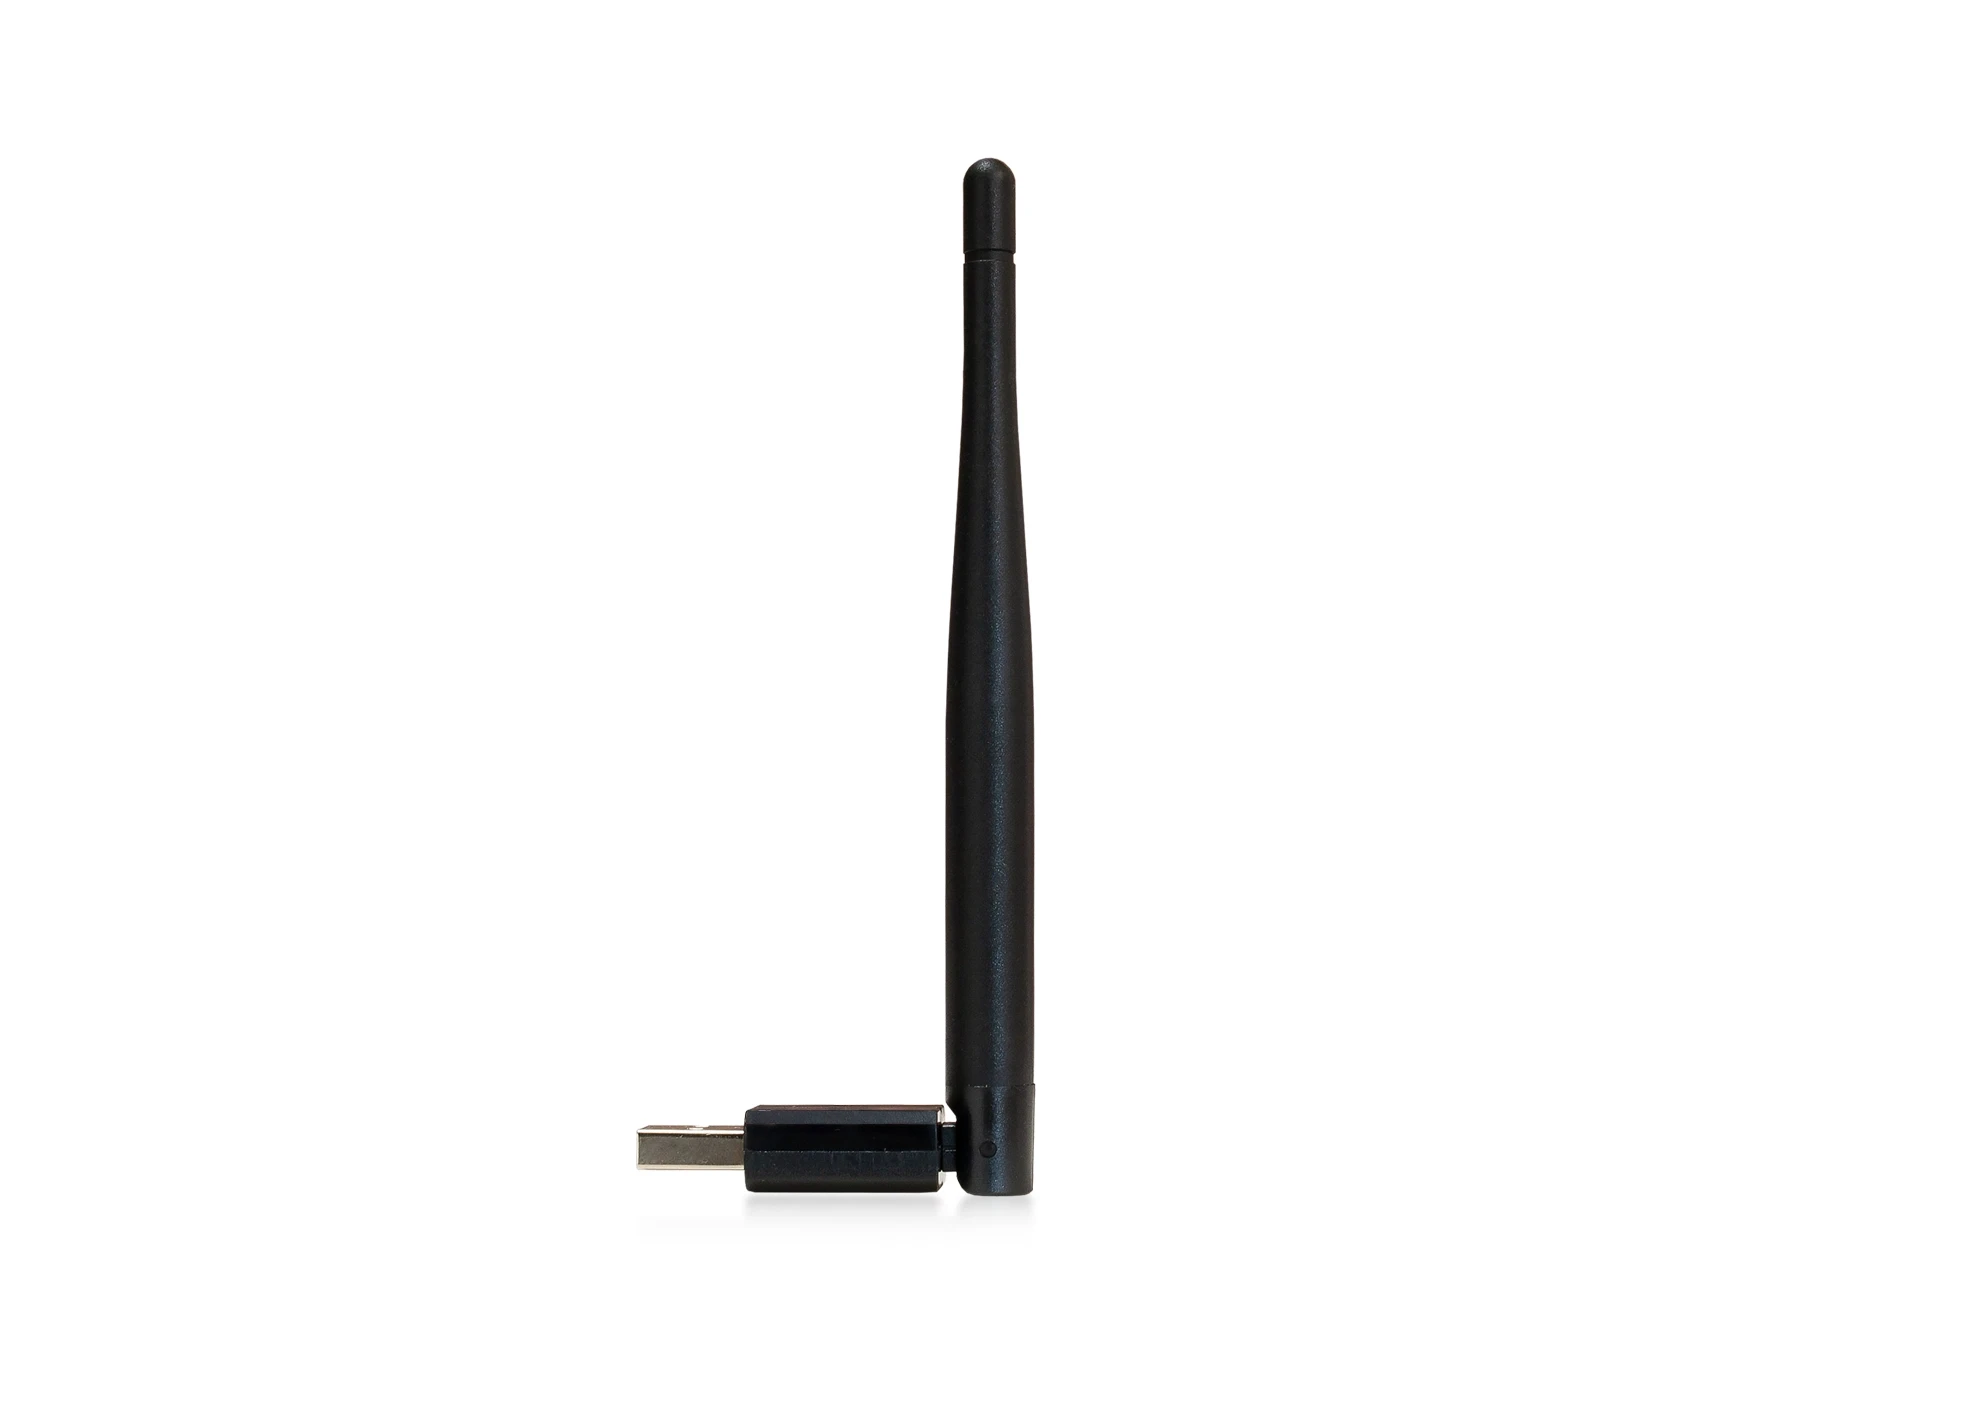 WiFi Dongle with 2dBi antenna, 150Mbps